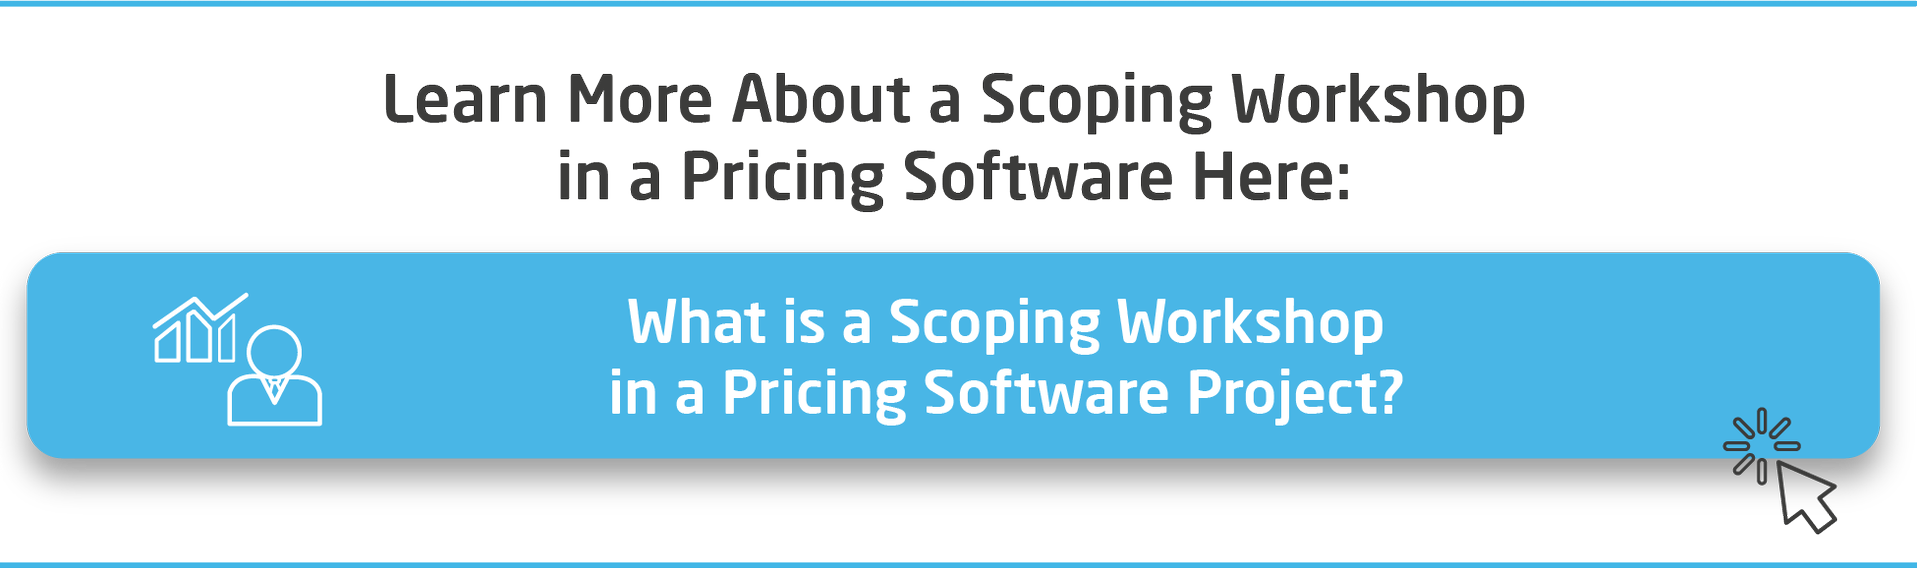 CTA-What-Is-a-Scoping-Project-In-a-Pricing-Software-Project